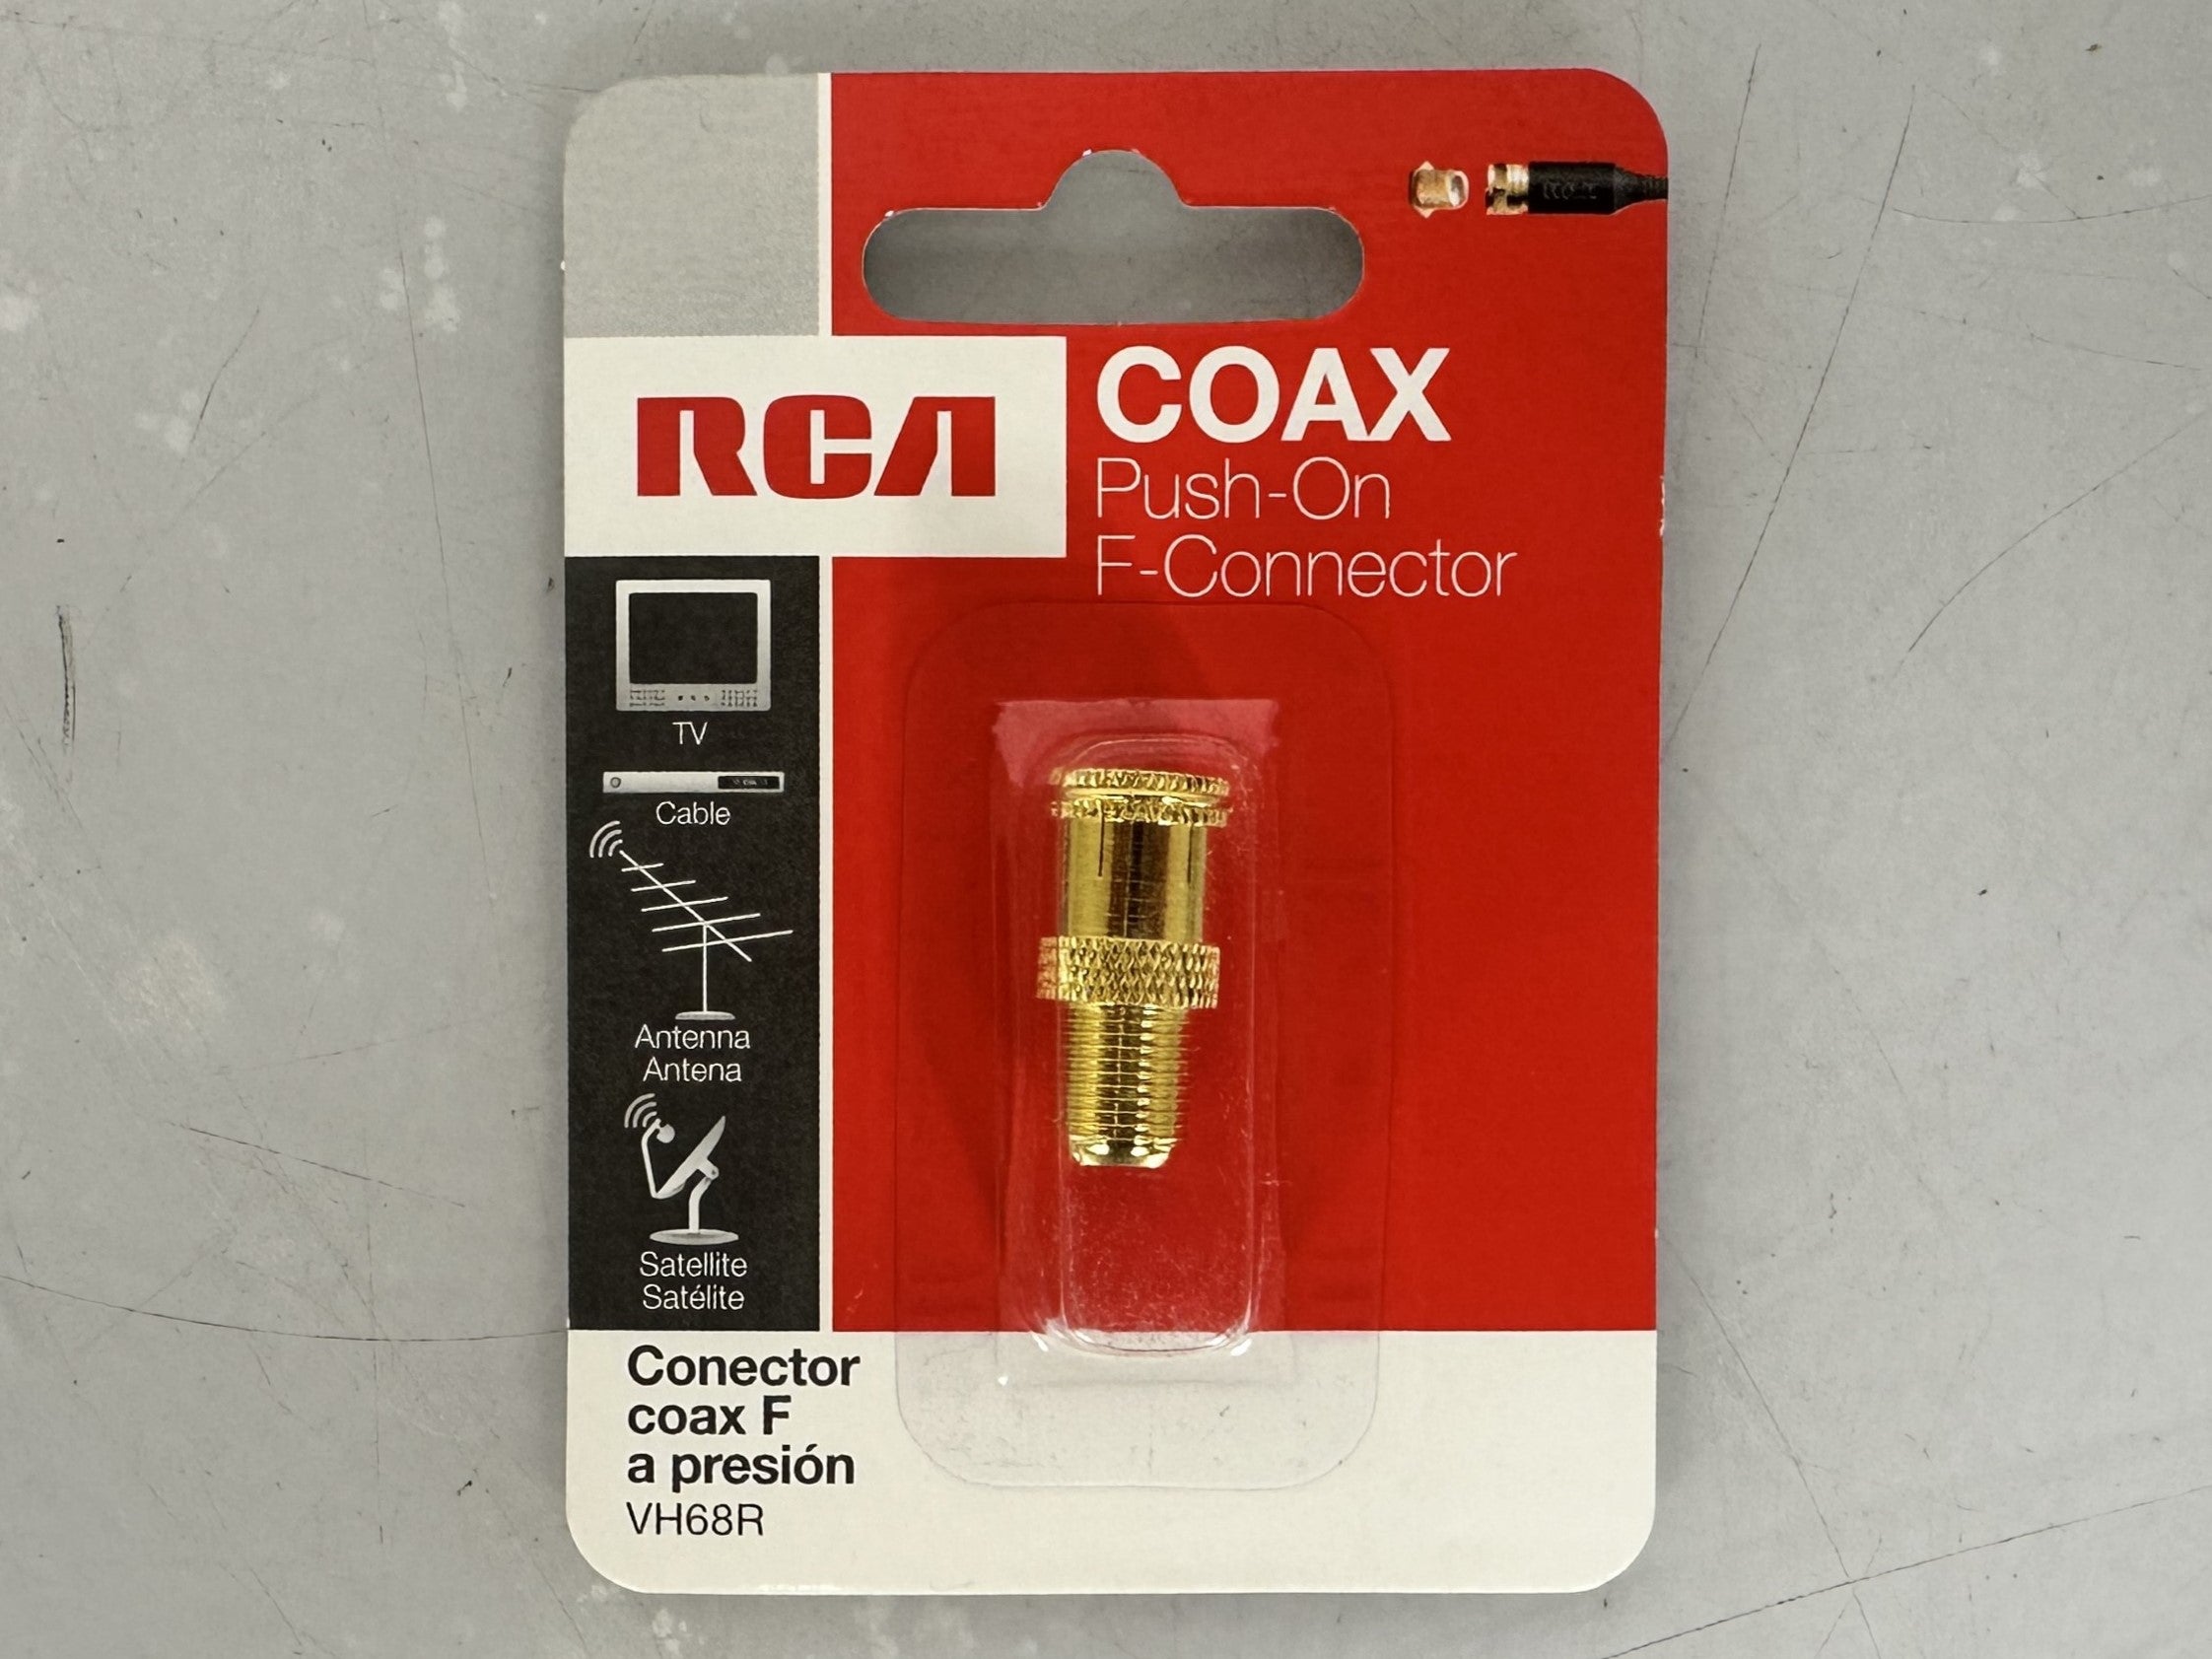 RCA Coax Push-On F-Connector